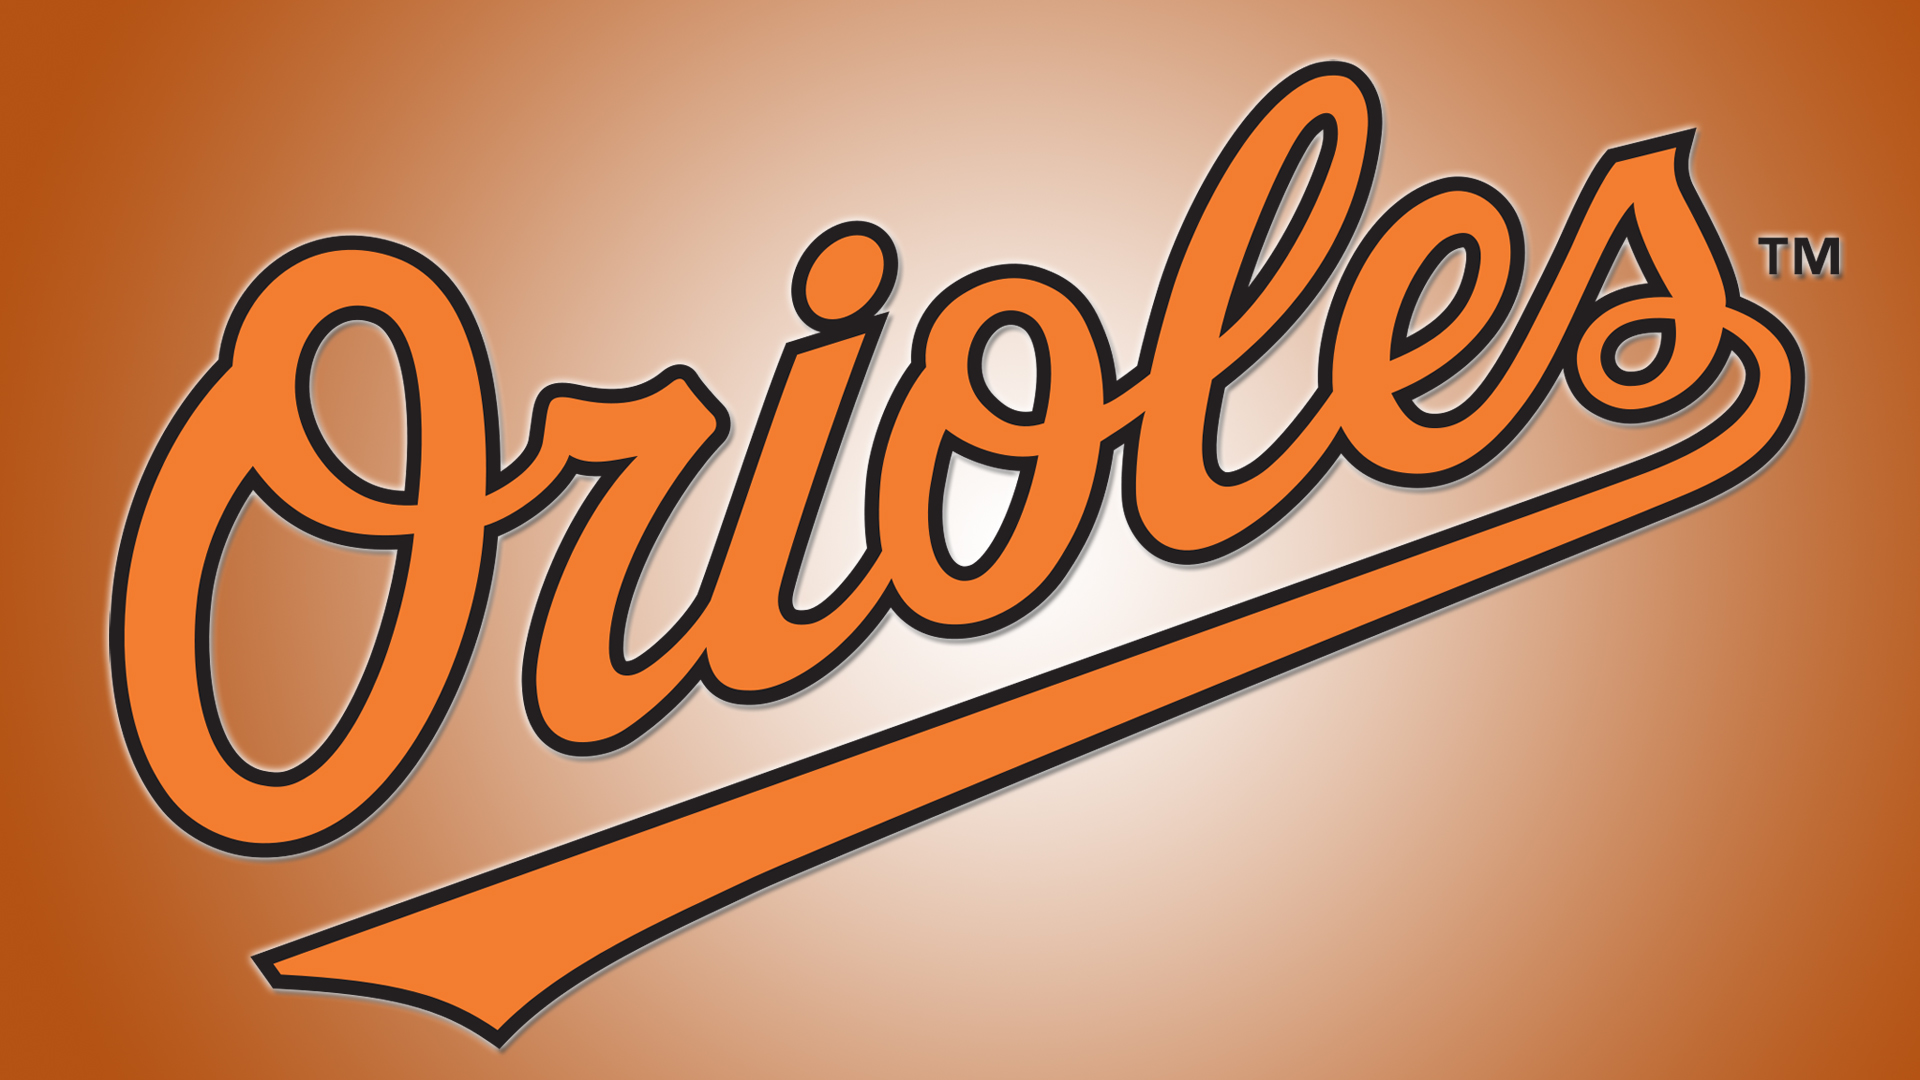 Baltimore Orioles Wallpaper Browser Themes More